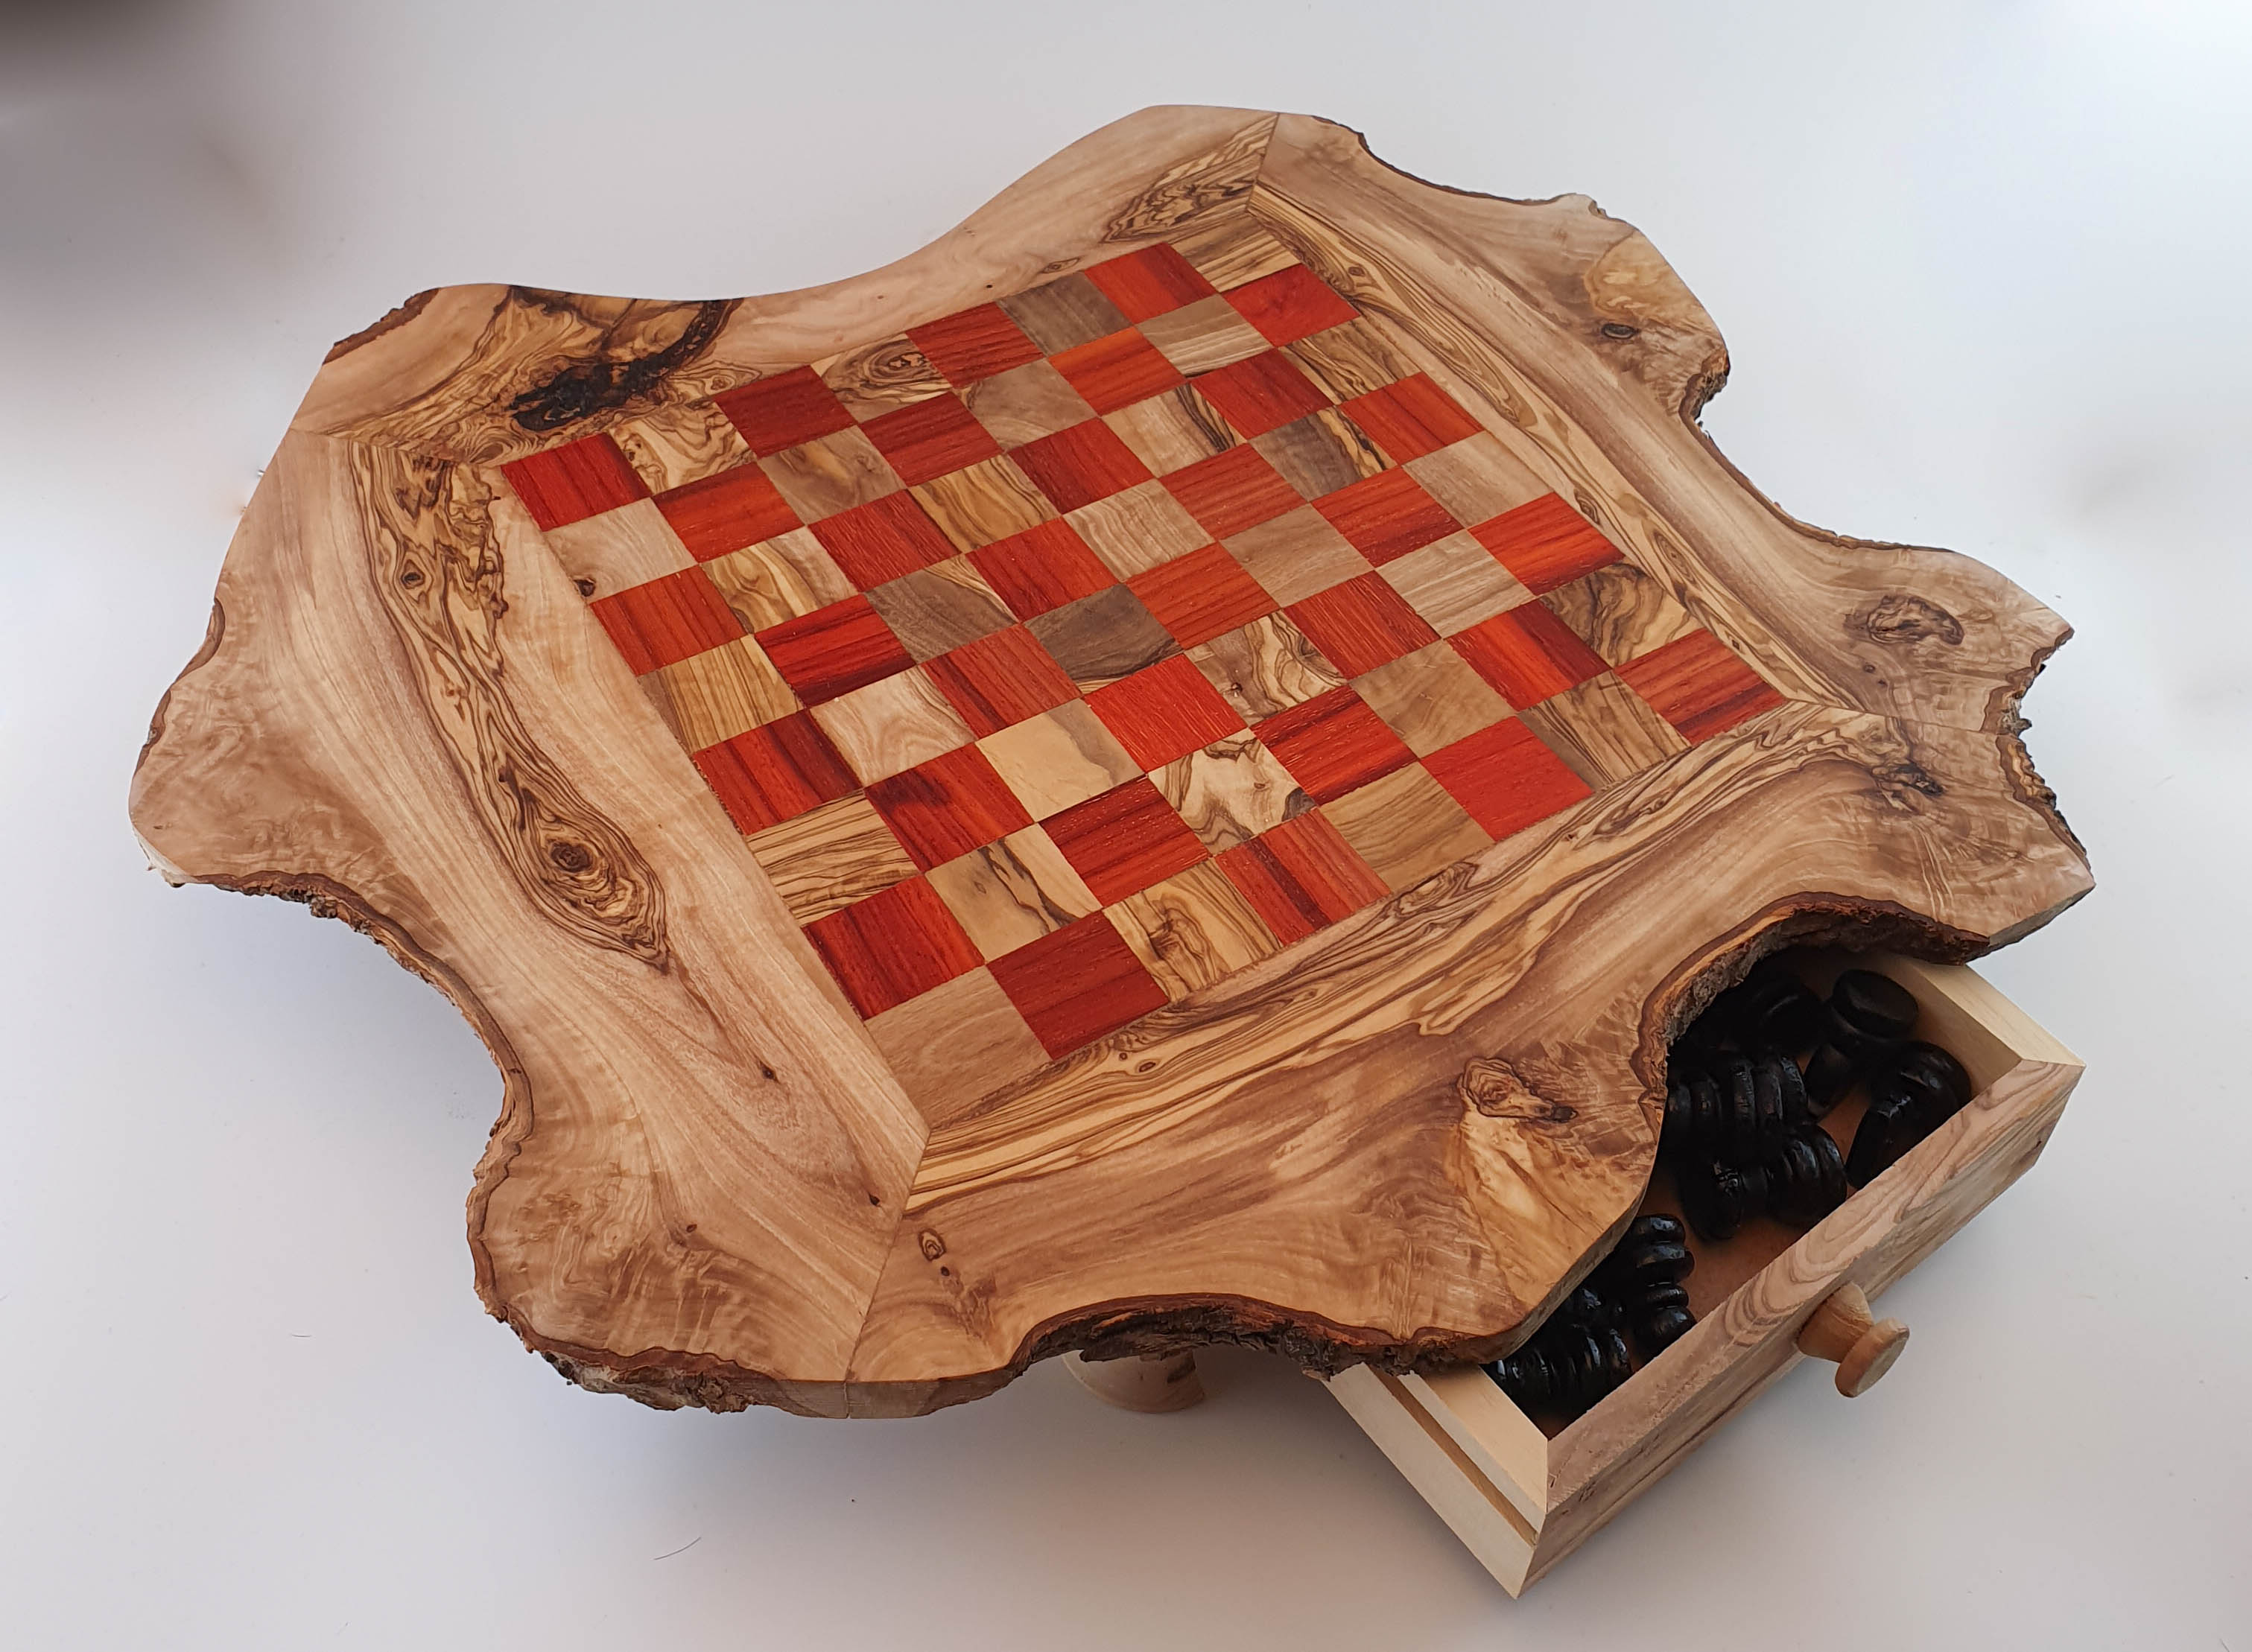 Rustic chess set with drawers made of olive wood, approximately 42cm x 42cm.